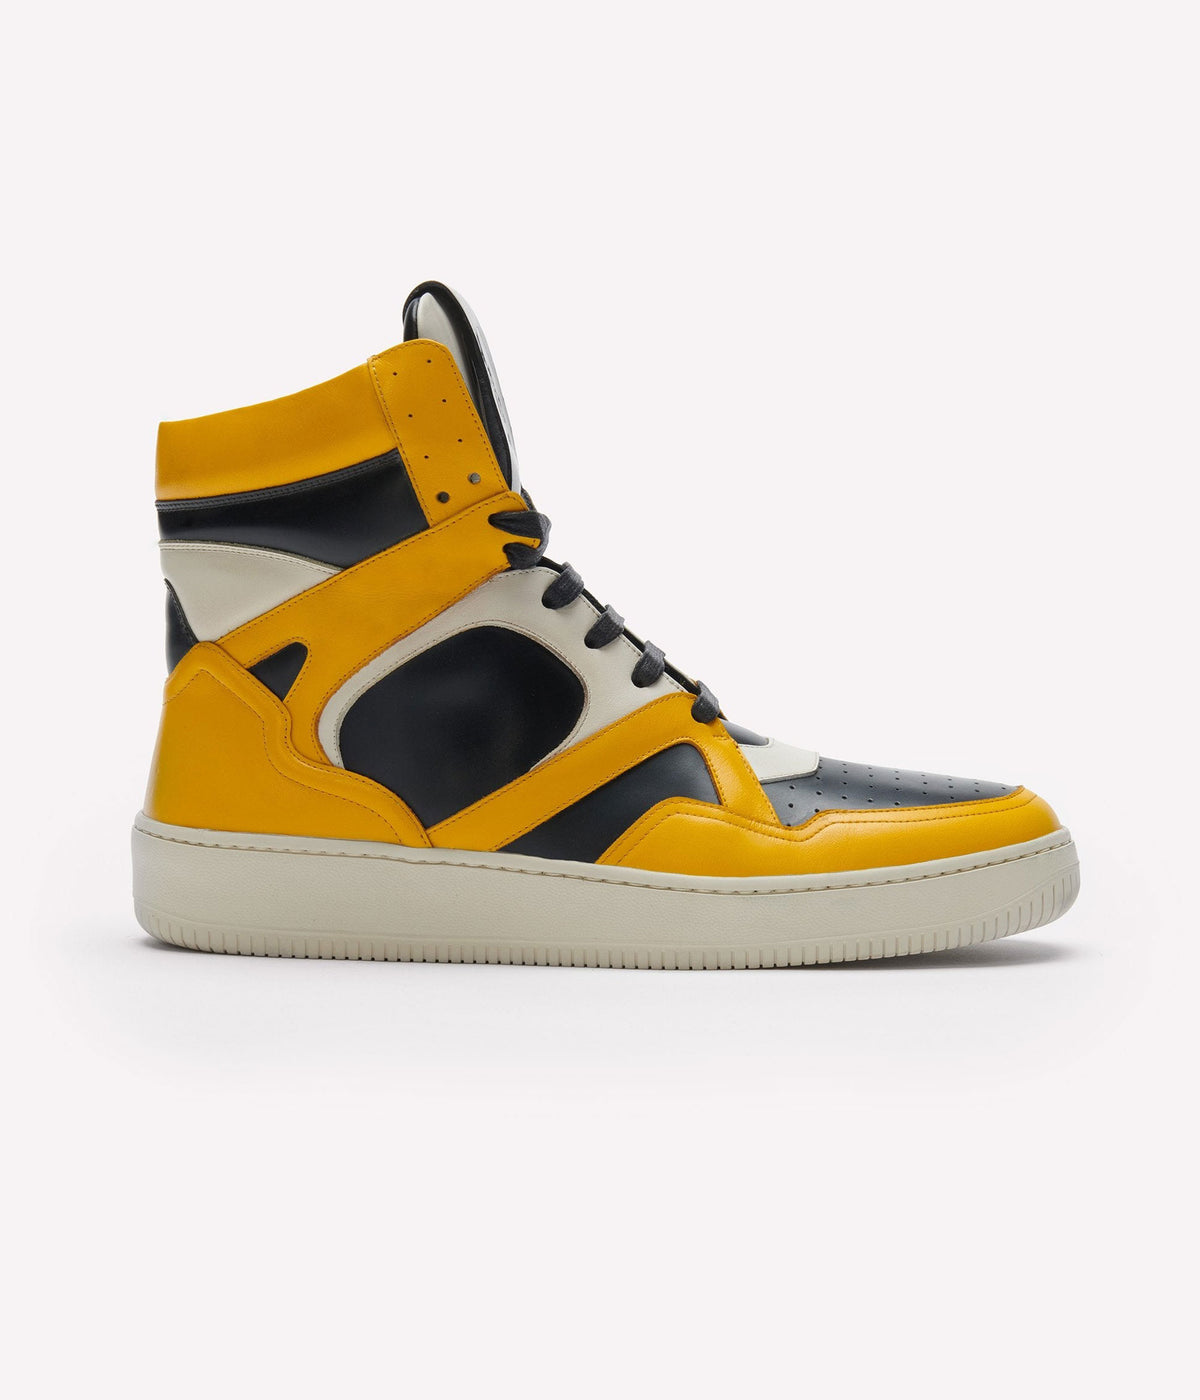 HUMAN RECREATIONAL SERVICES MONGOOSE SHOE IN YELLOW OFF WHITE AND BLACK MADE WITH ITALIAN CALF SKIN